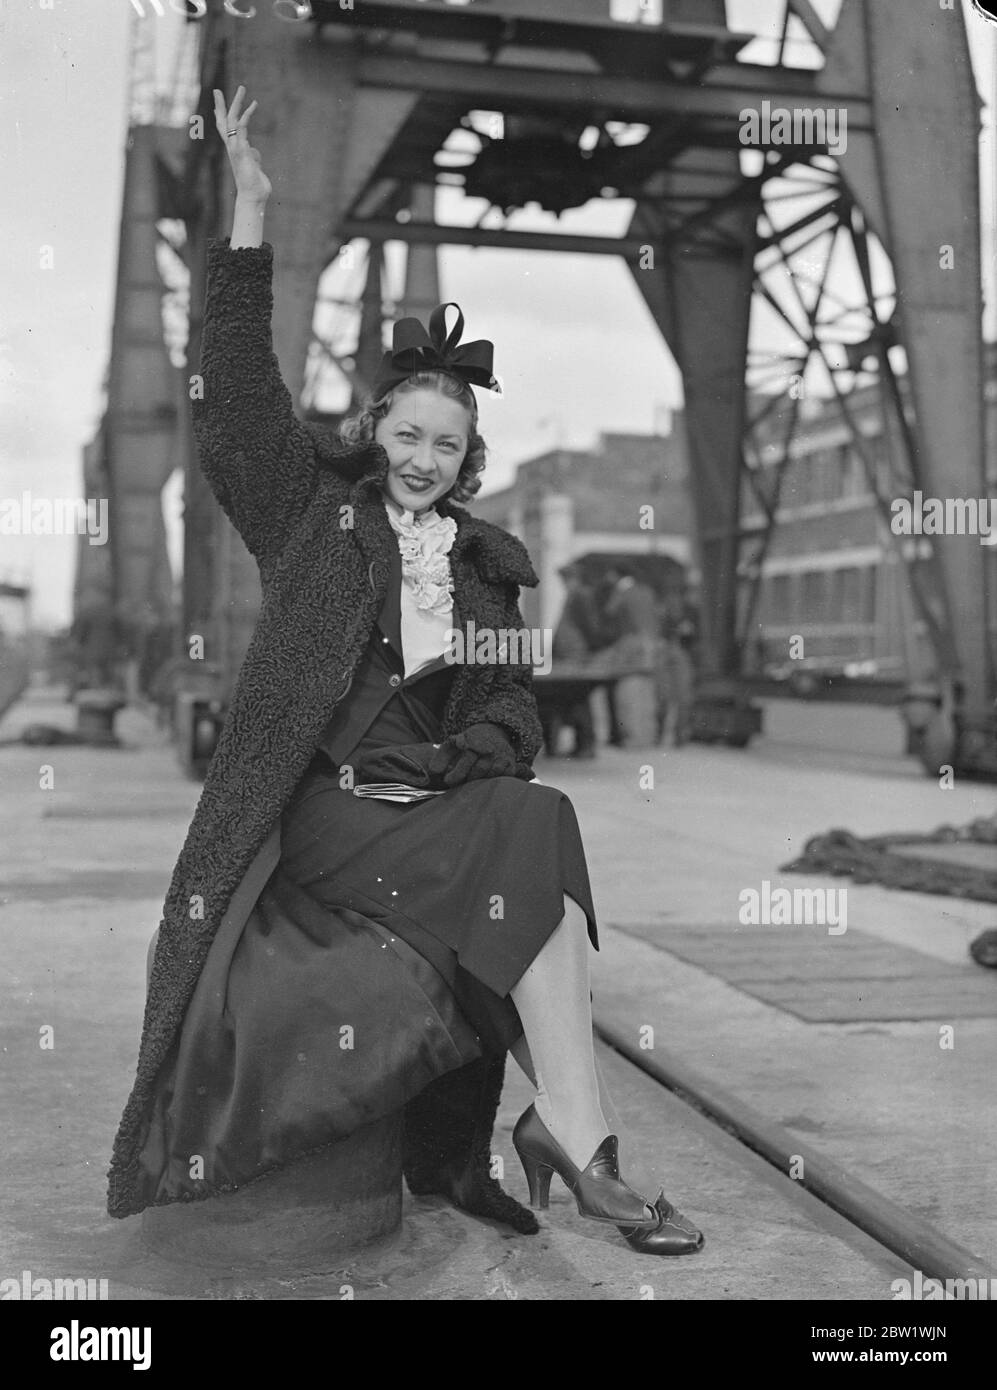 Ballerina arrives in England to appear in Coronation Opera. Irena Baronova, the ballerina, arrived at Southampton on the liner 'Normandie' from America. She is to appear in Coronation Opera at Covent Garden. Photo shows, Irena Baronova on arrival at Southampton. 19 April 1937 Stock Photo